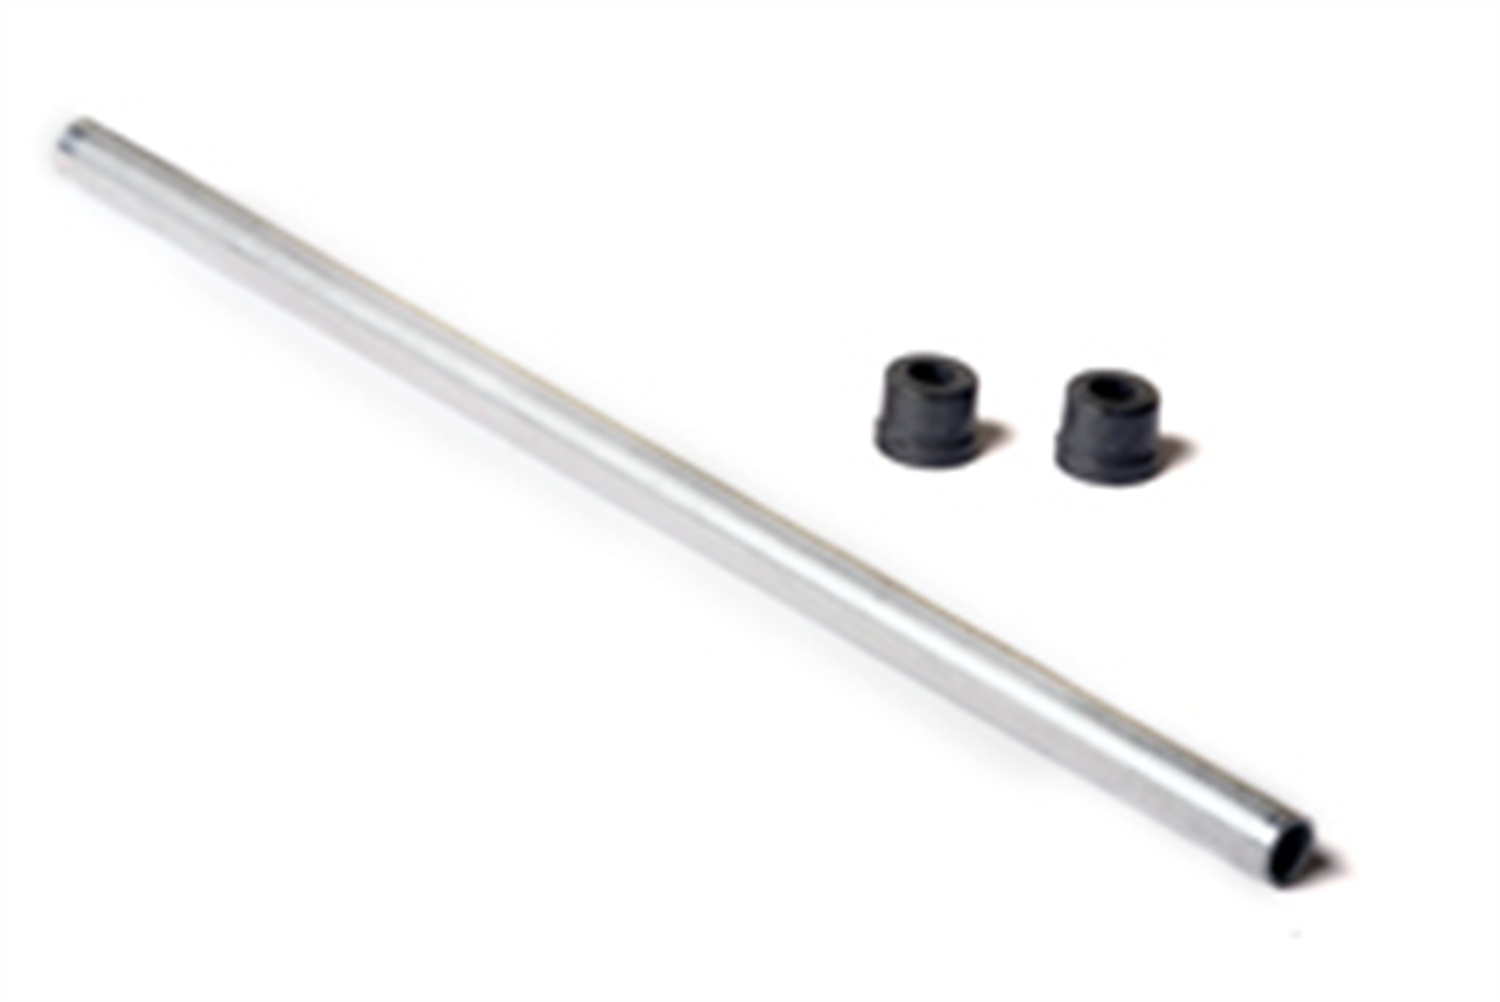 Holley Performance Holley Performance 26-116 Fuel Transfer Tube